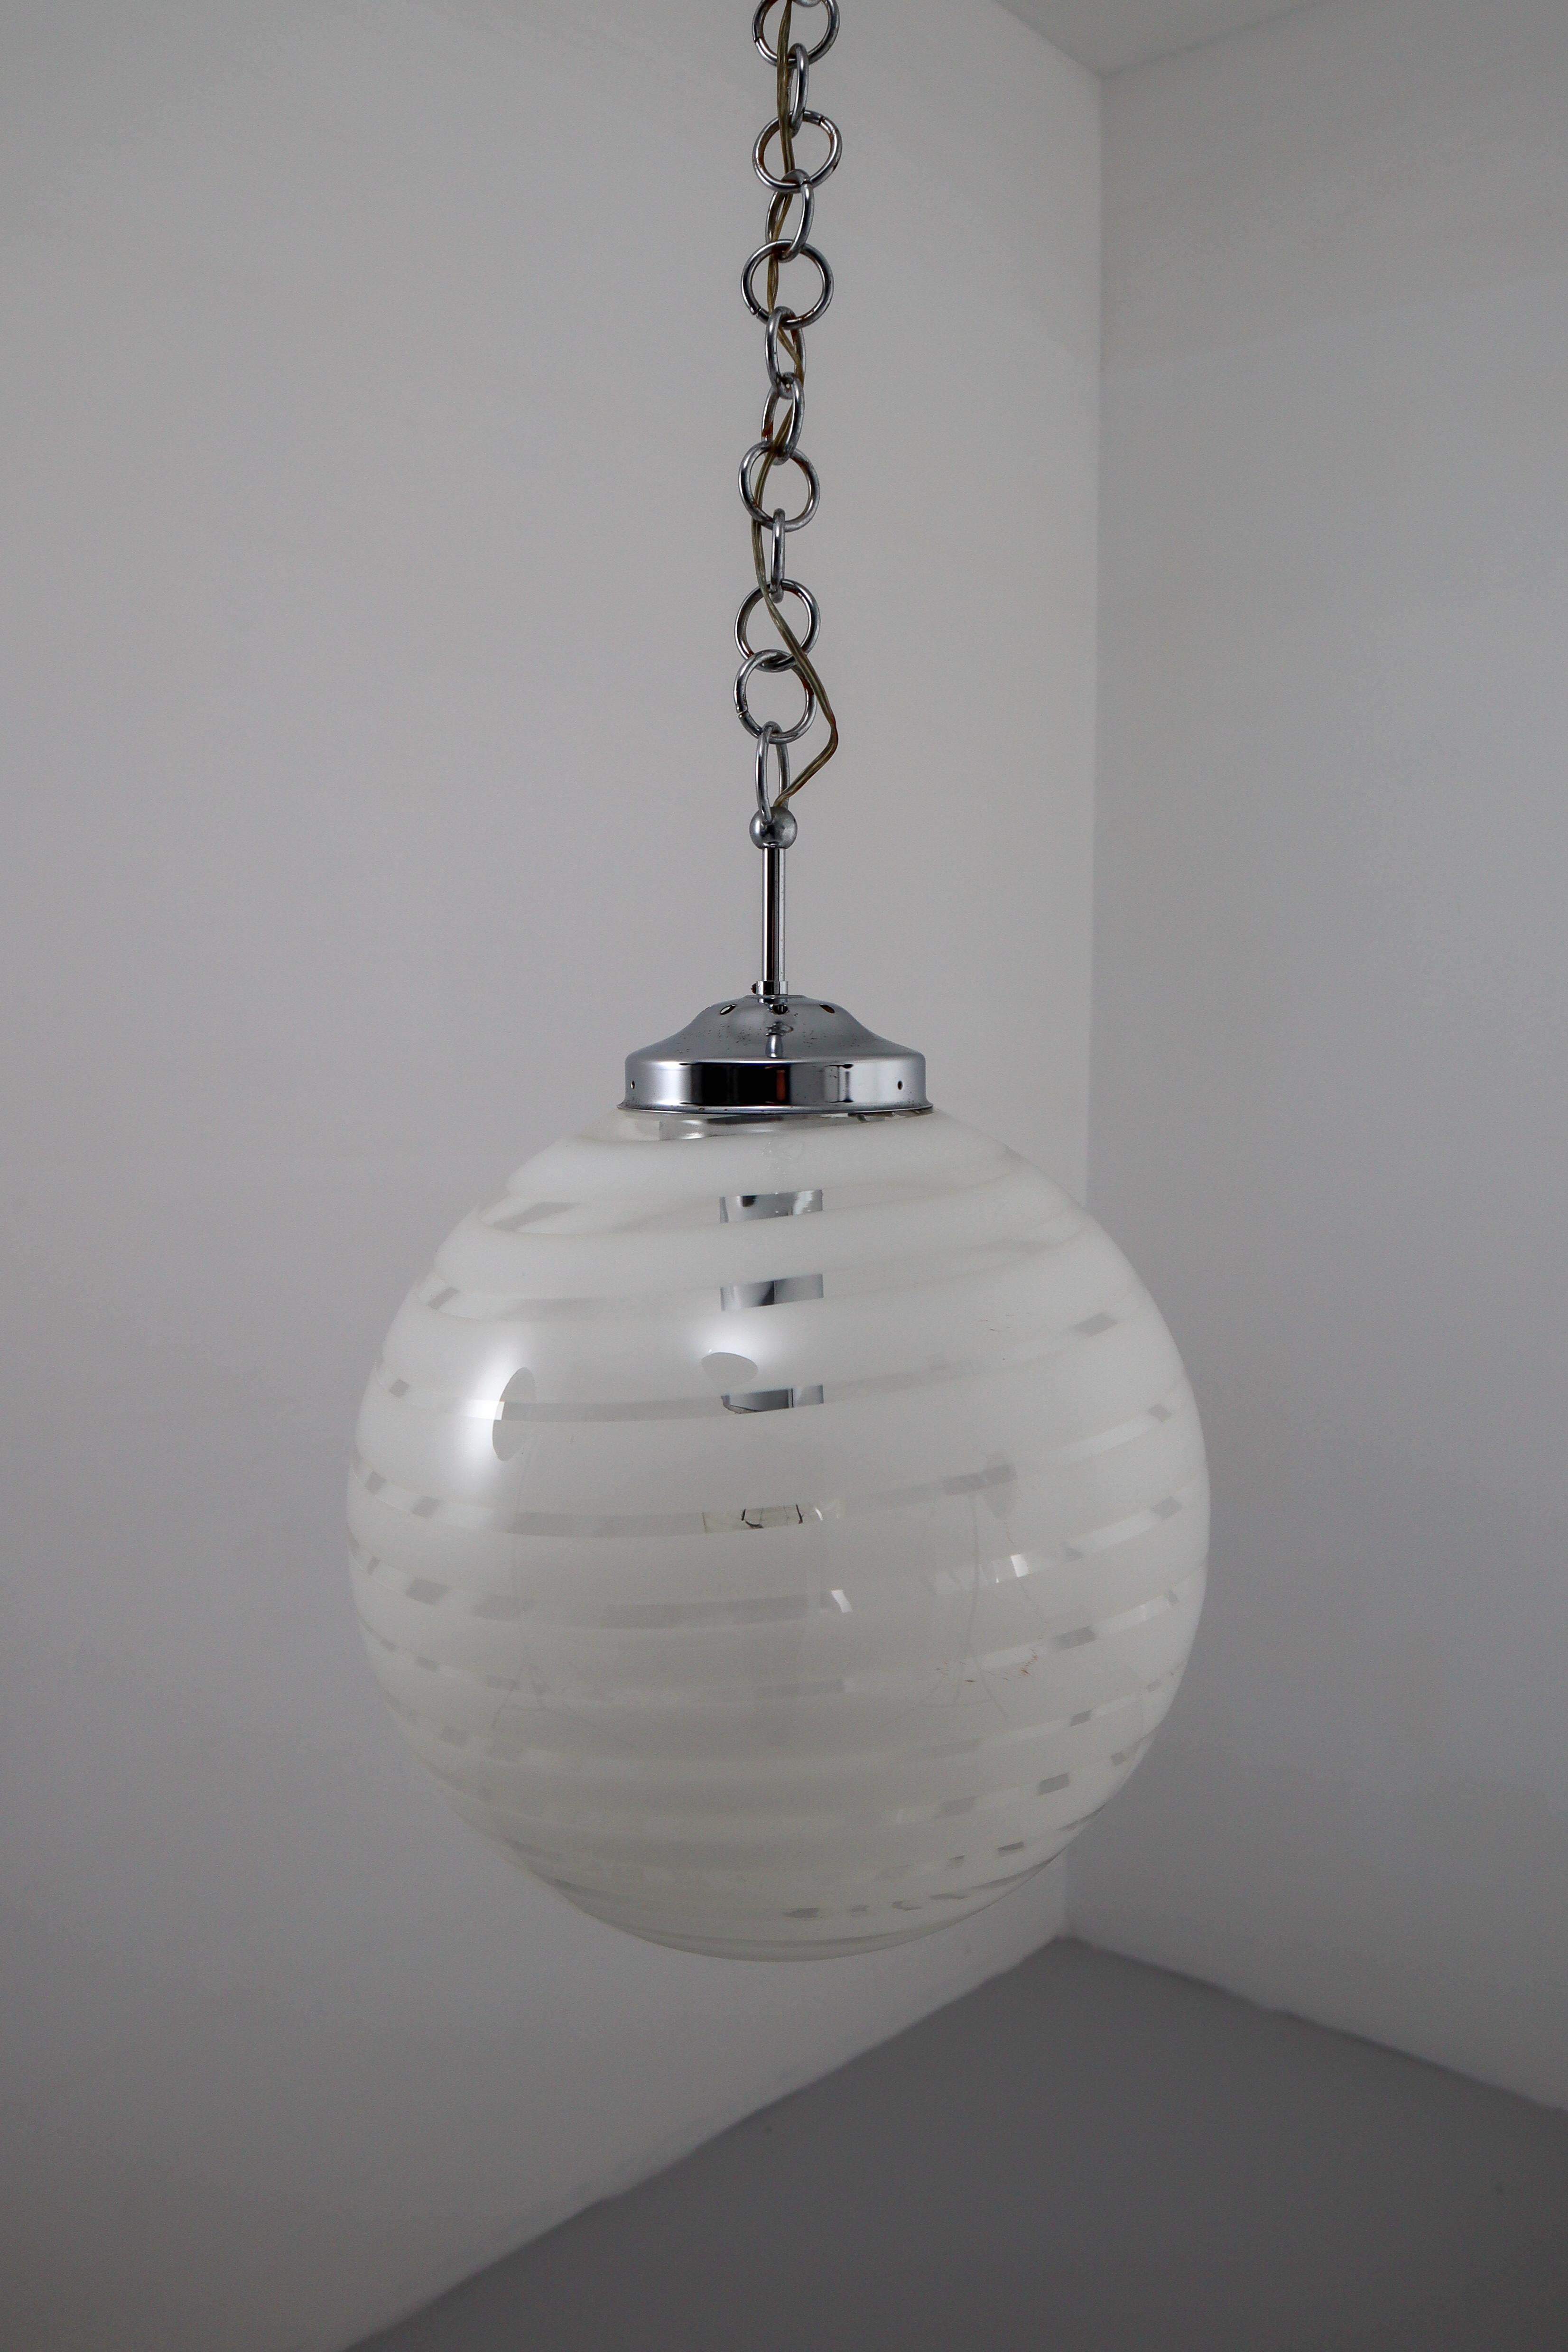 Midcentury Pendant in Chrome and Art-Glass with White Streaks, Germany, 1970s For Sale 5